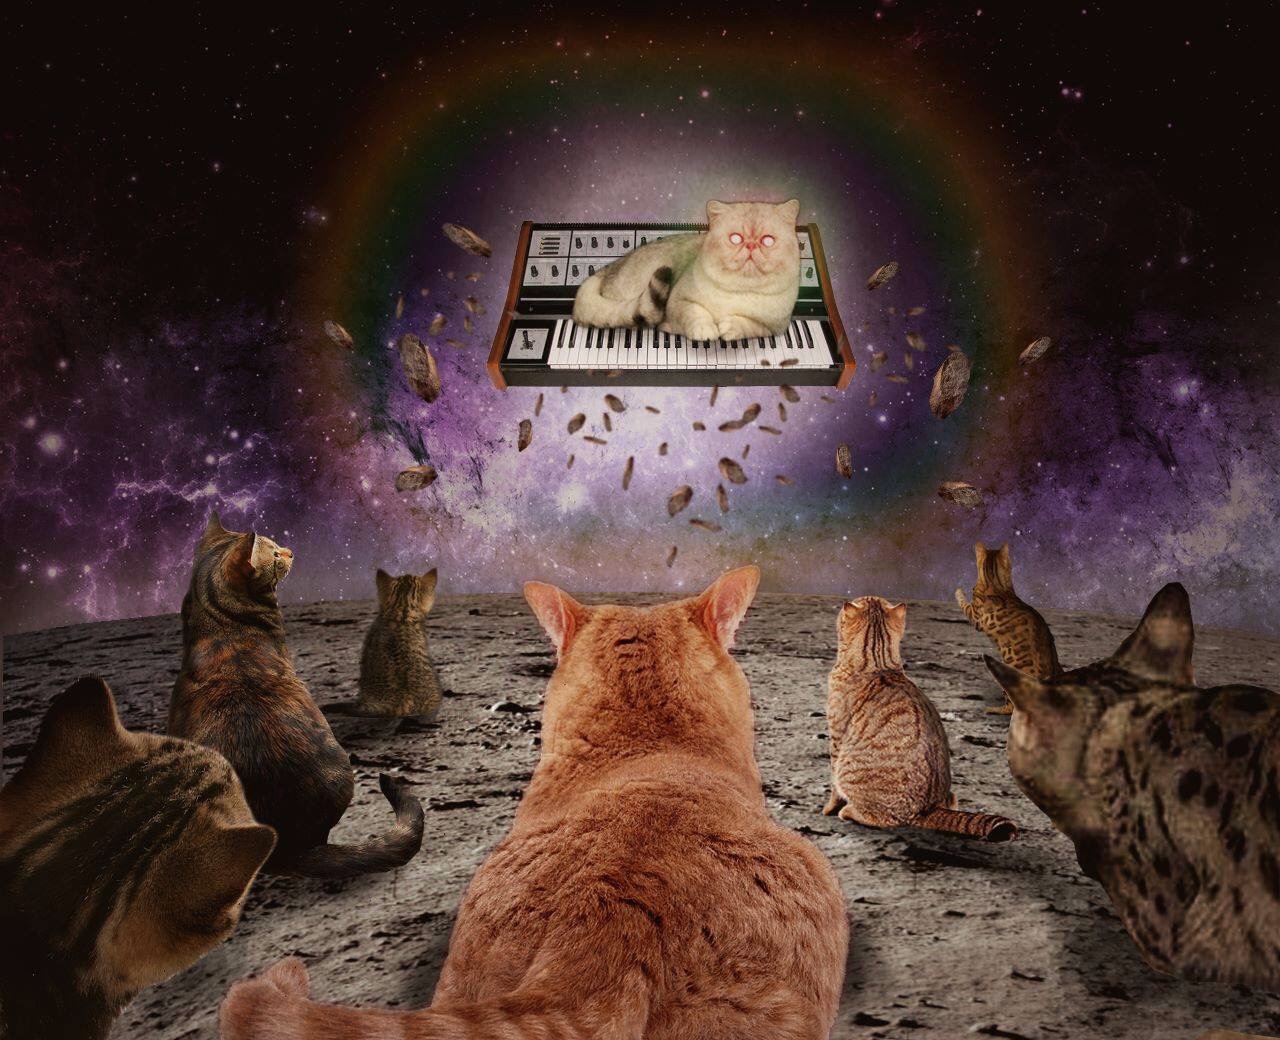 Cats on Synthesizers. In Space.